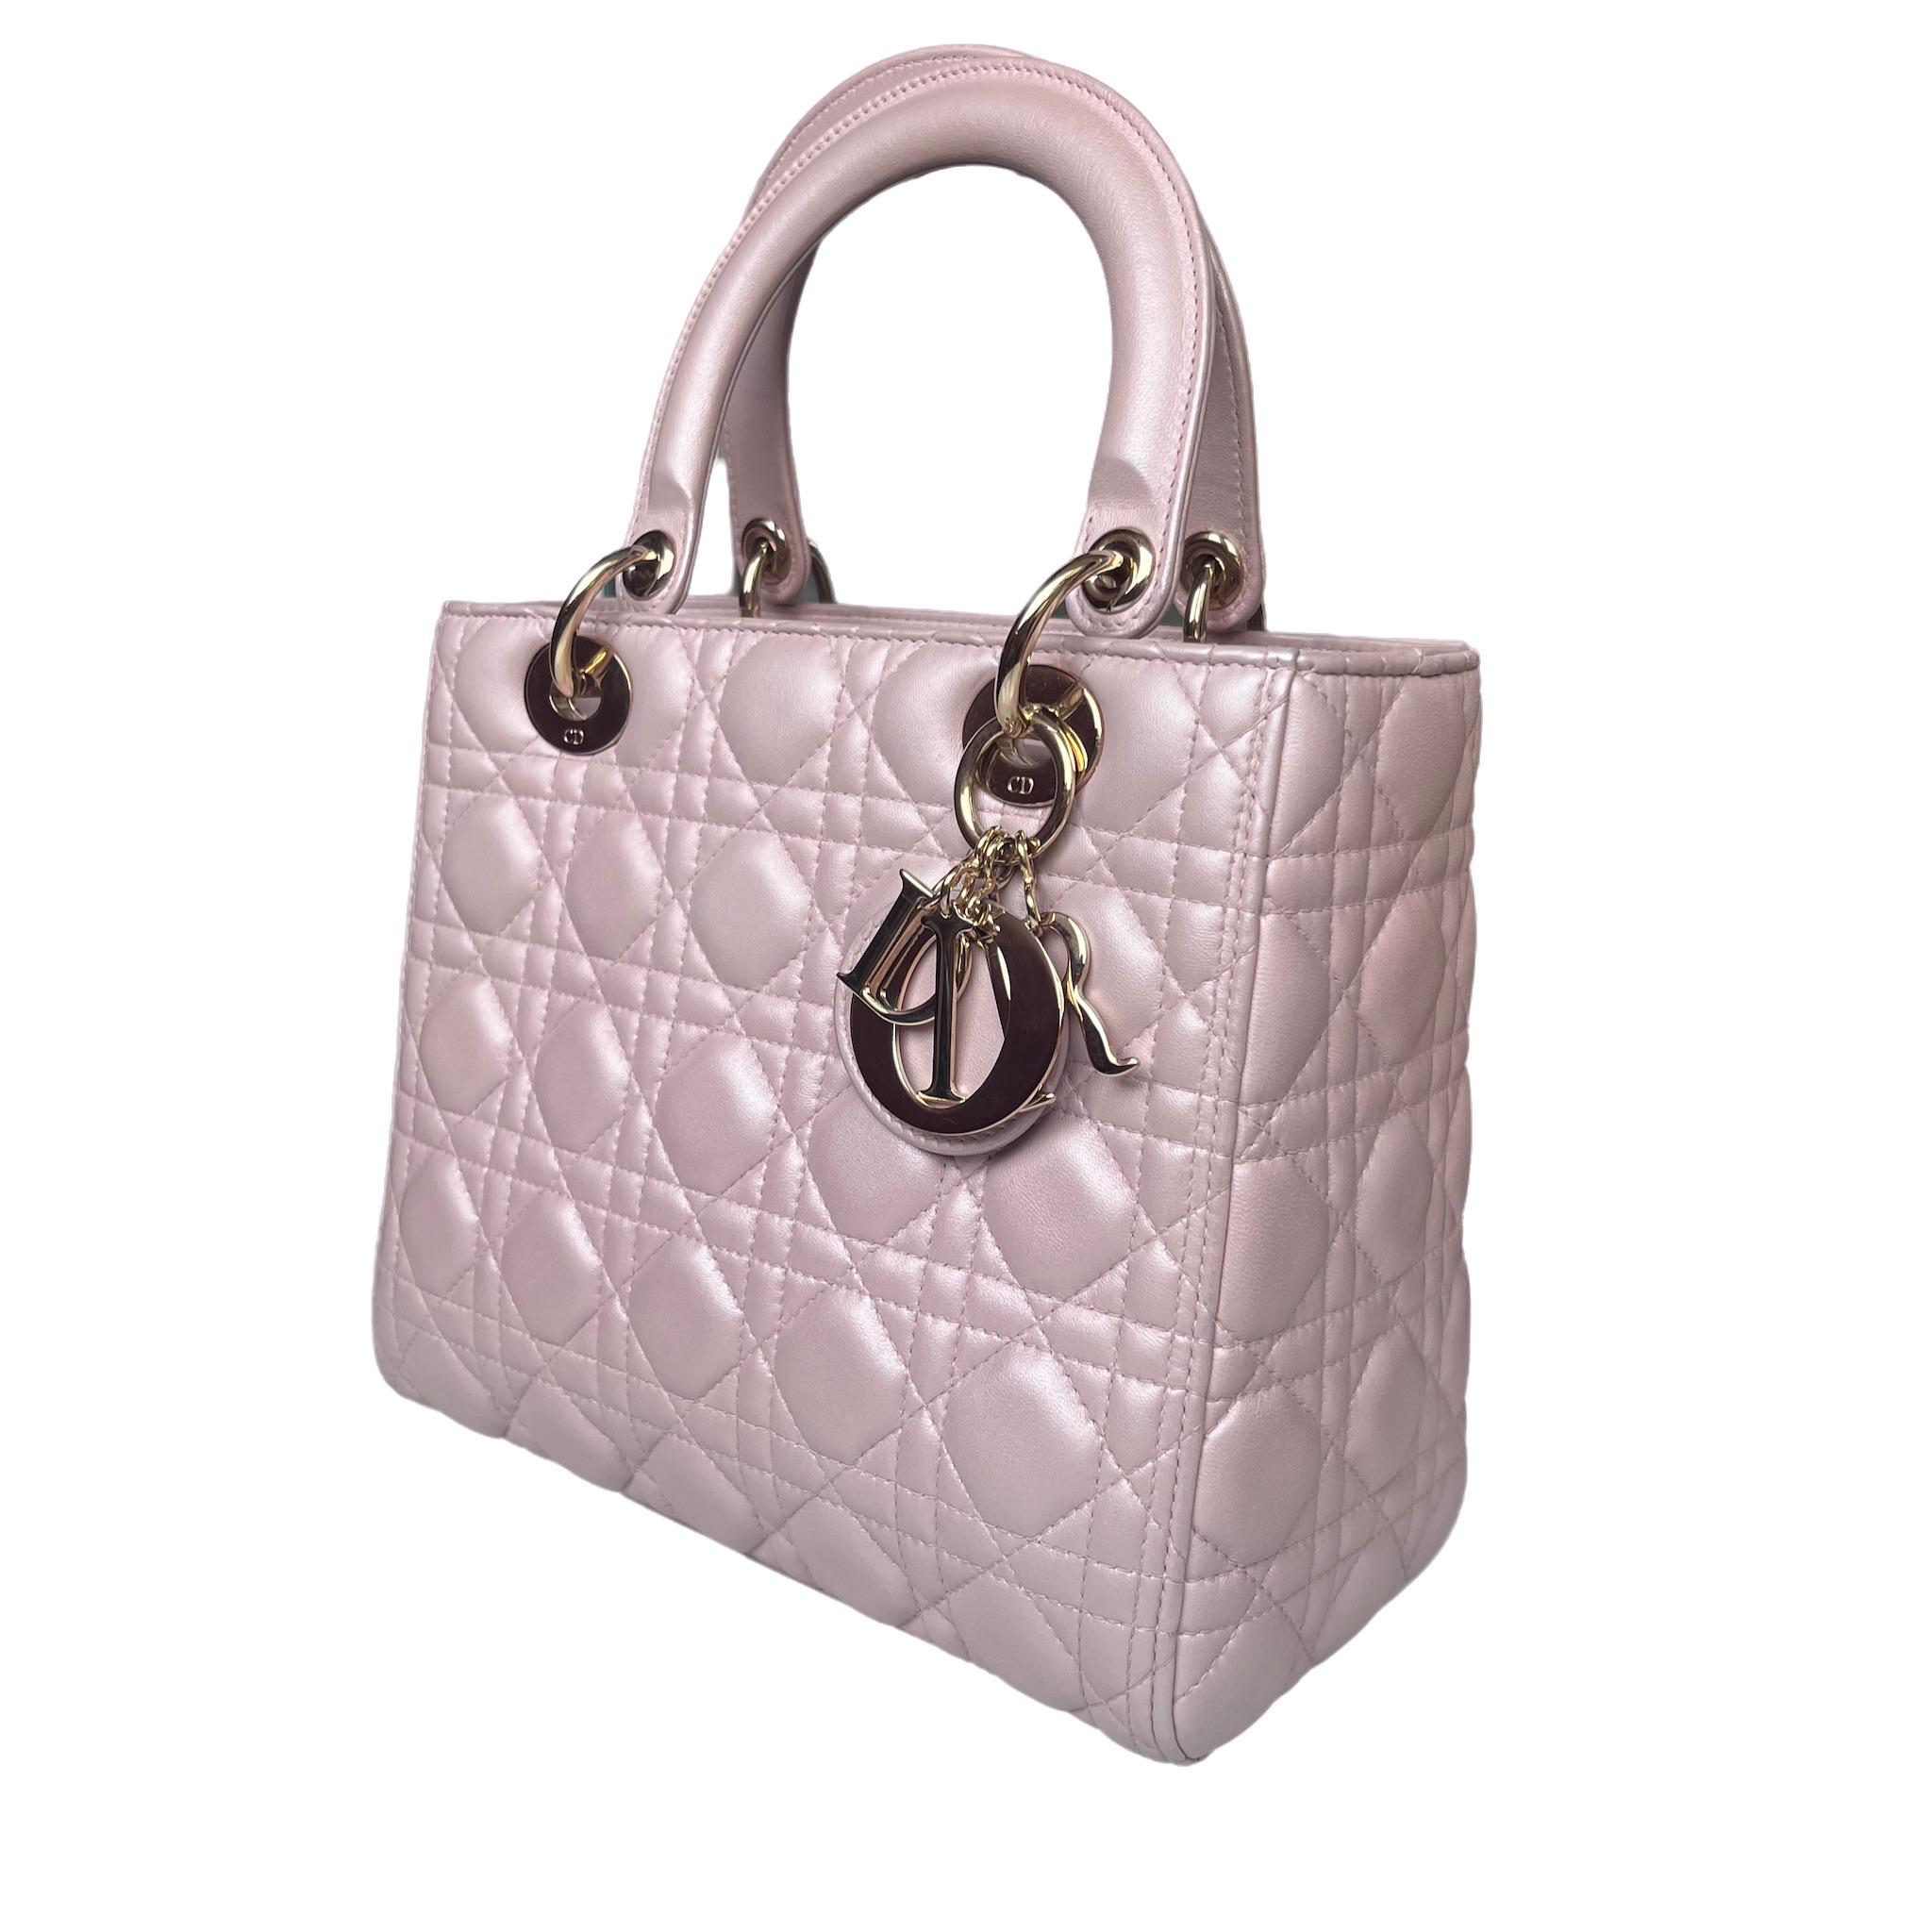 Lady Dior Medium Handbag Pearlescent Pink Cannage Leather Gold Hardware For Sale 2